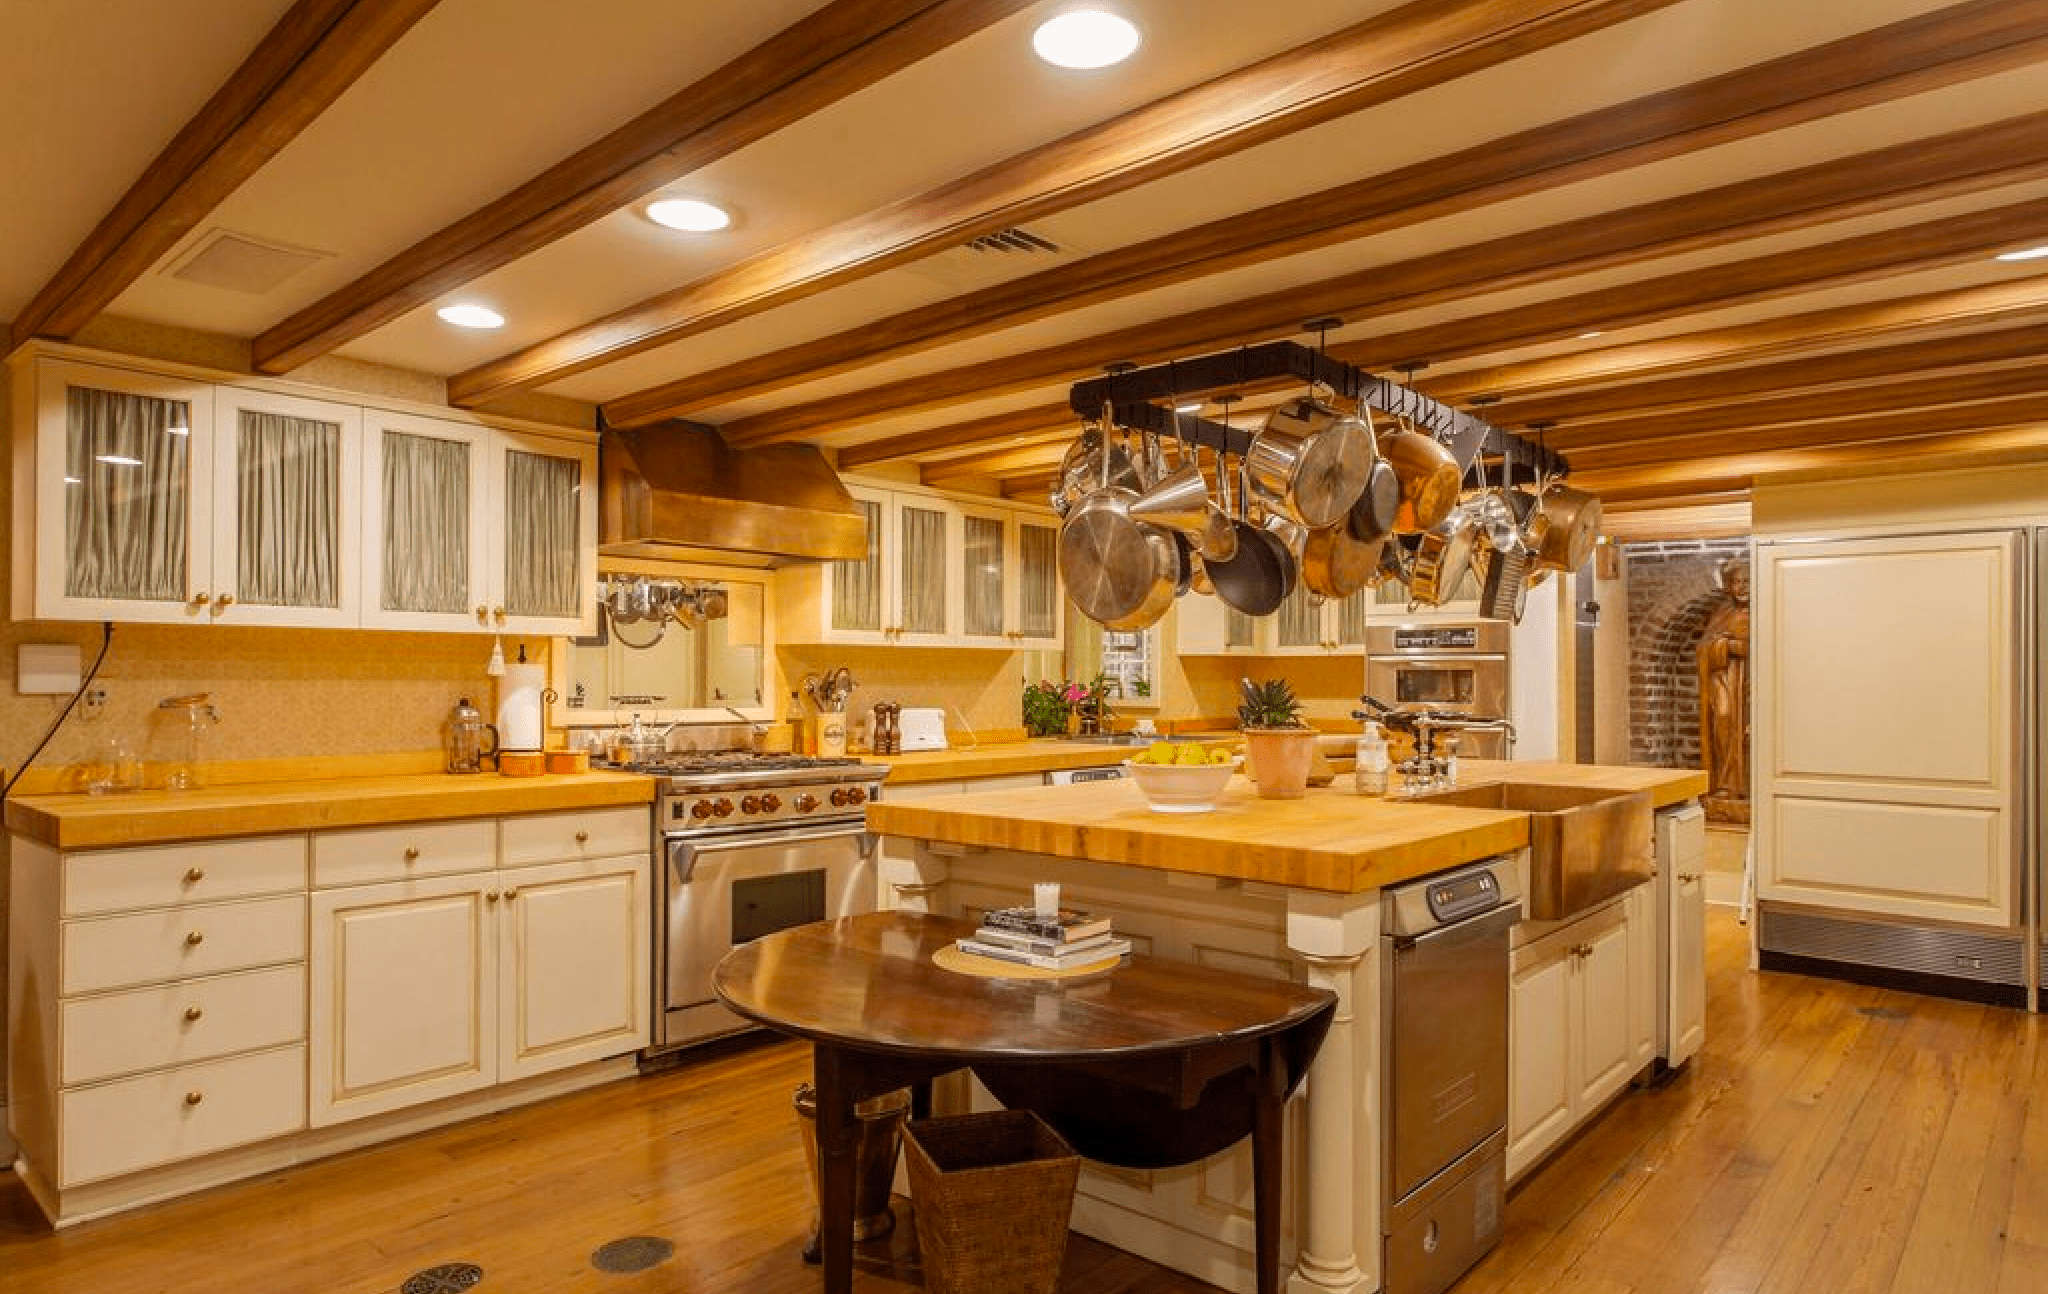 Historic home with butcher block island